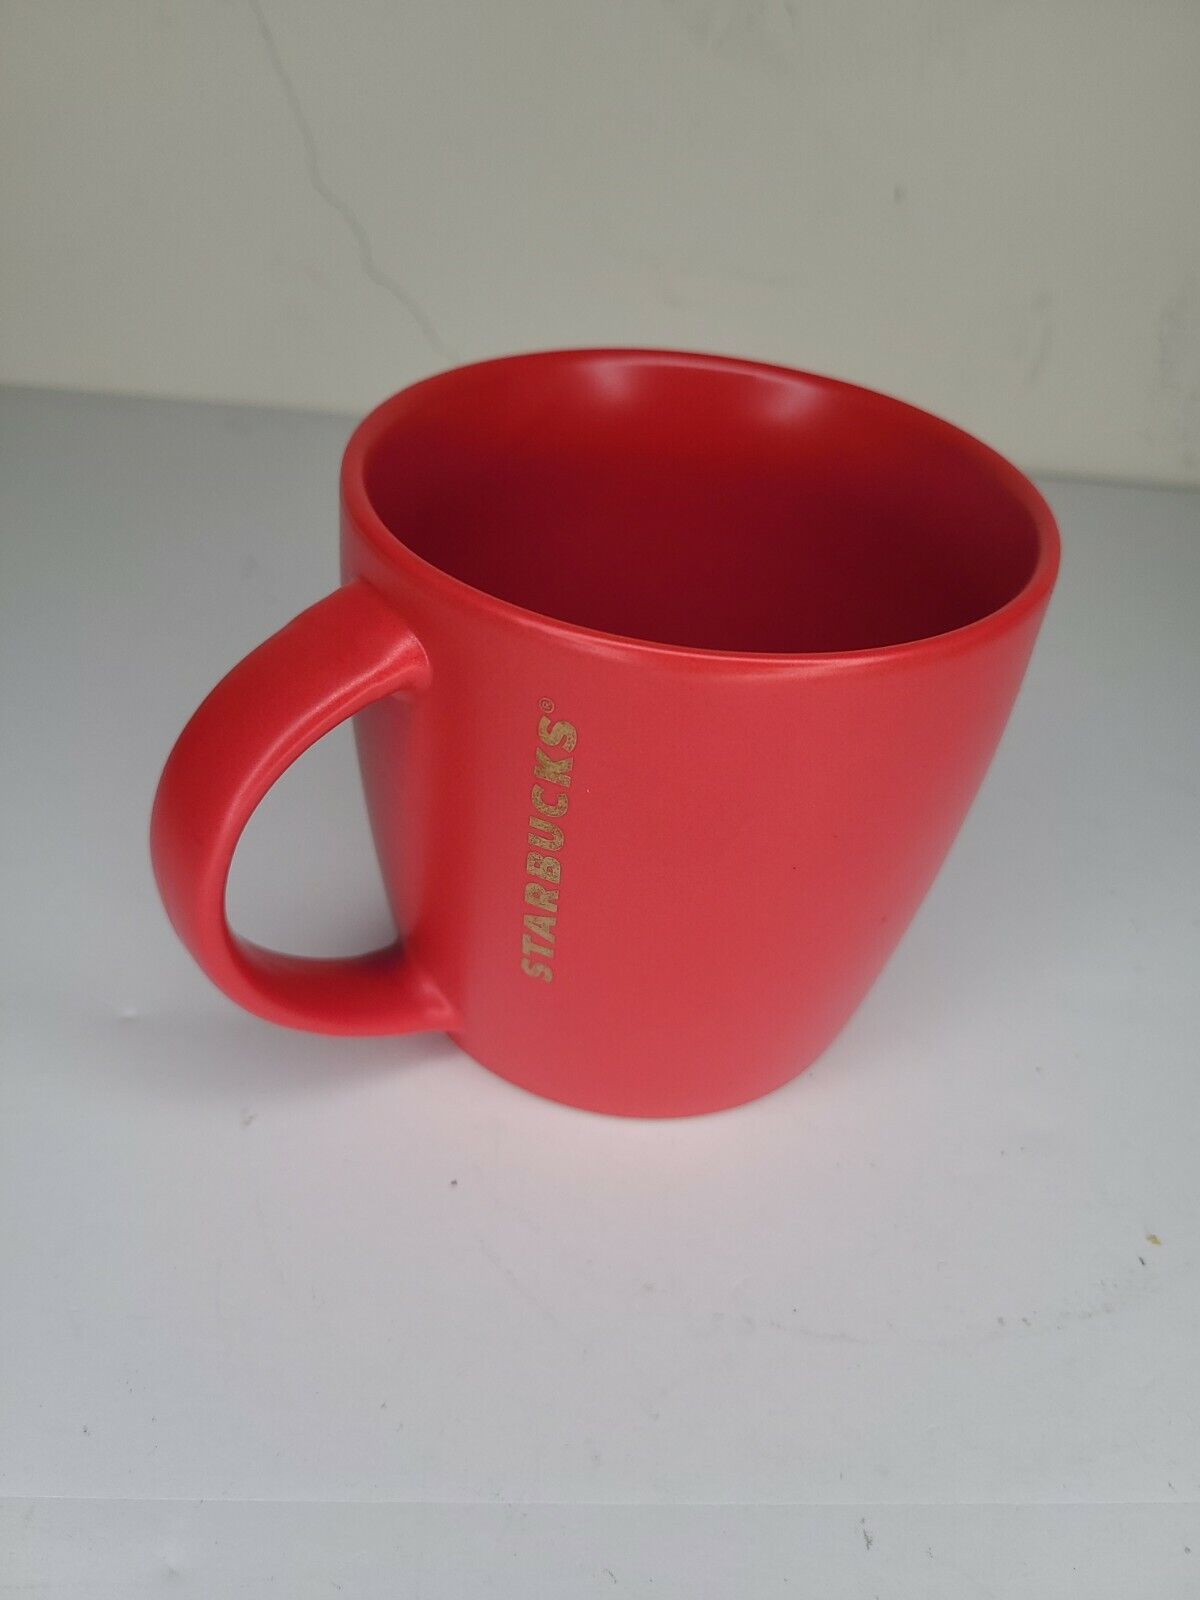 2016 Starbucks Matte Solid Red With Gold Lettering Coffee Mug 14oz.